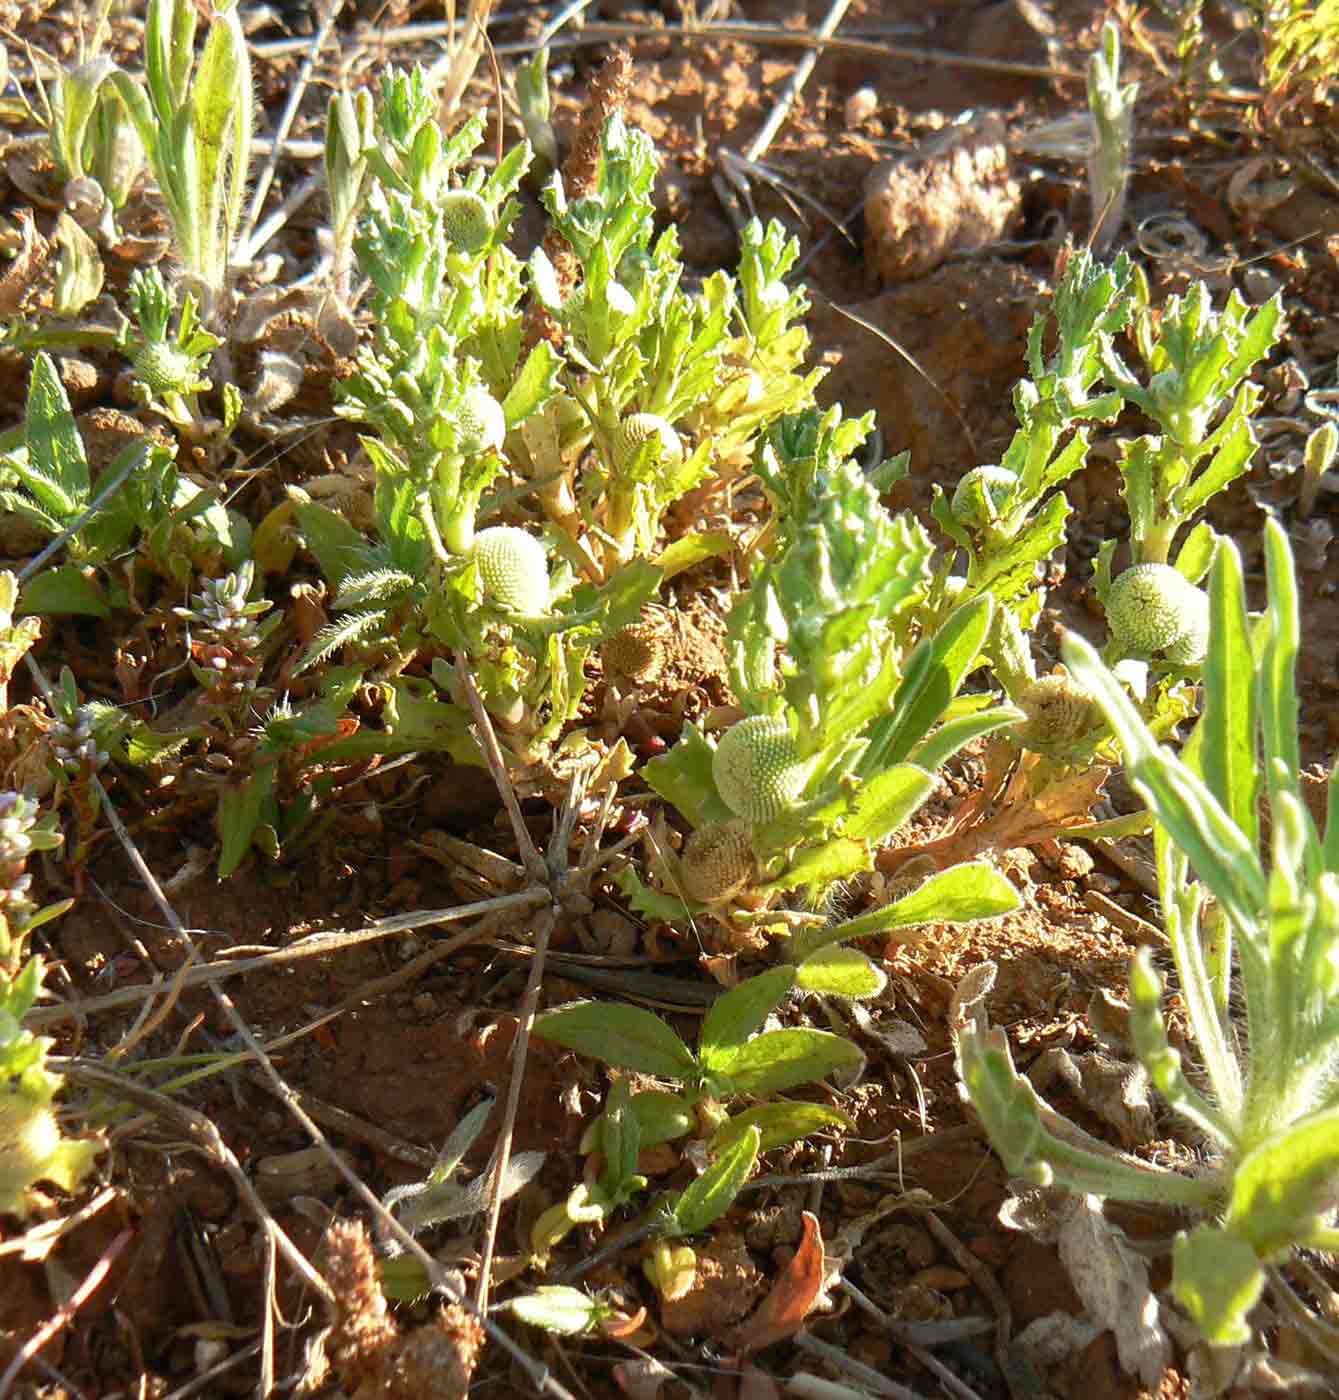 A patch of weeds with green serrated leaves.